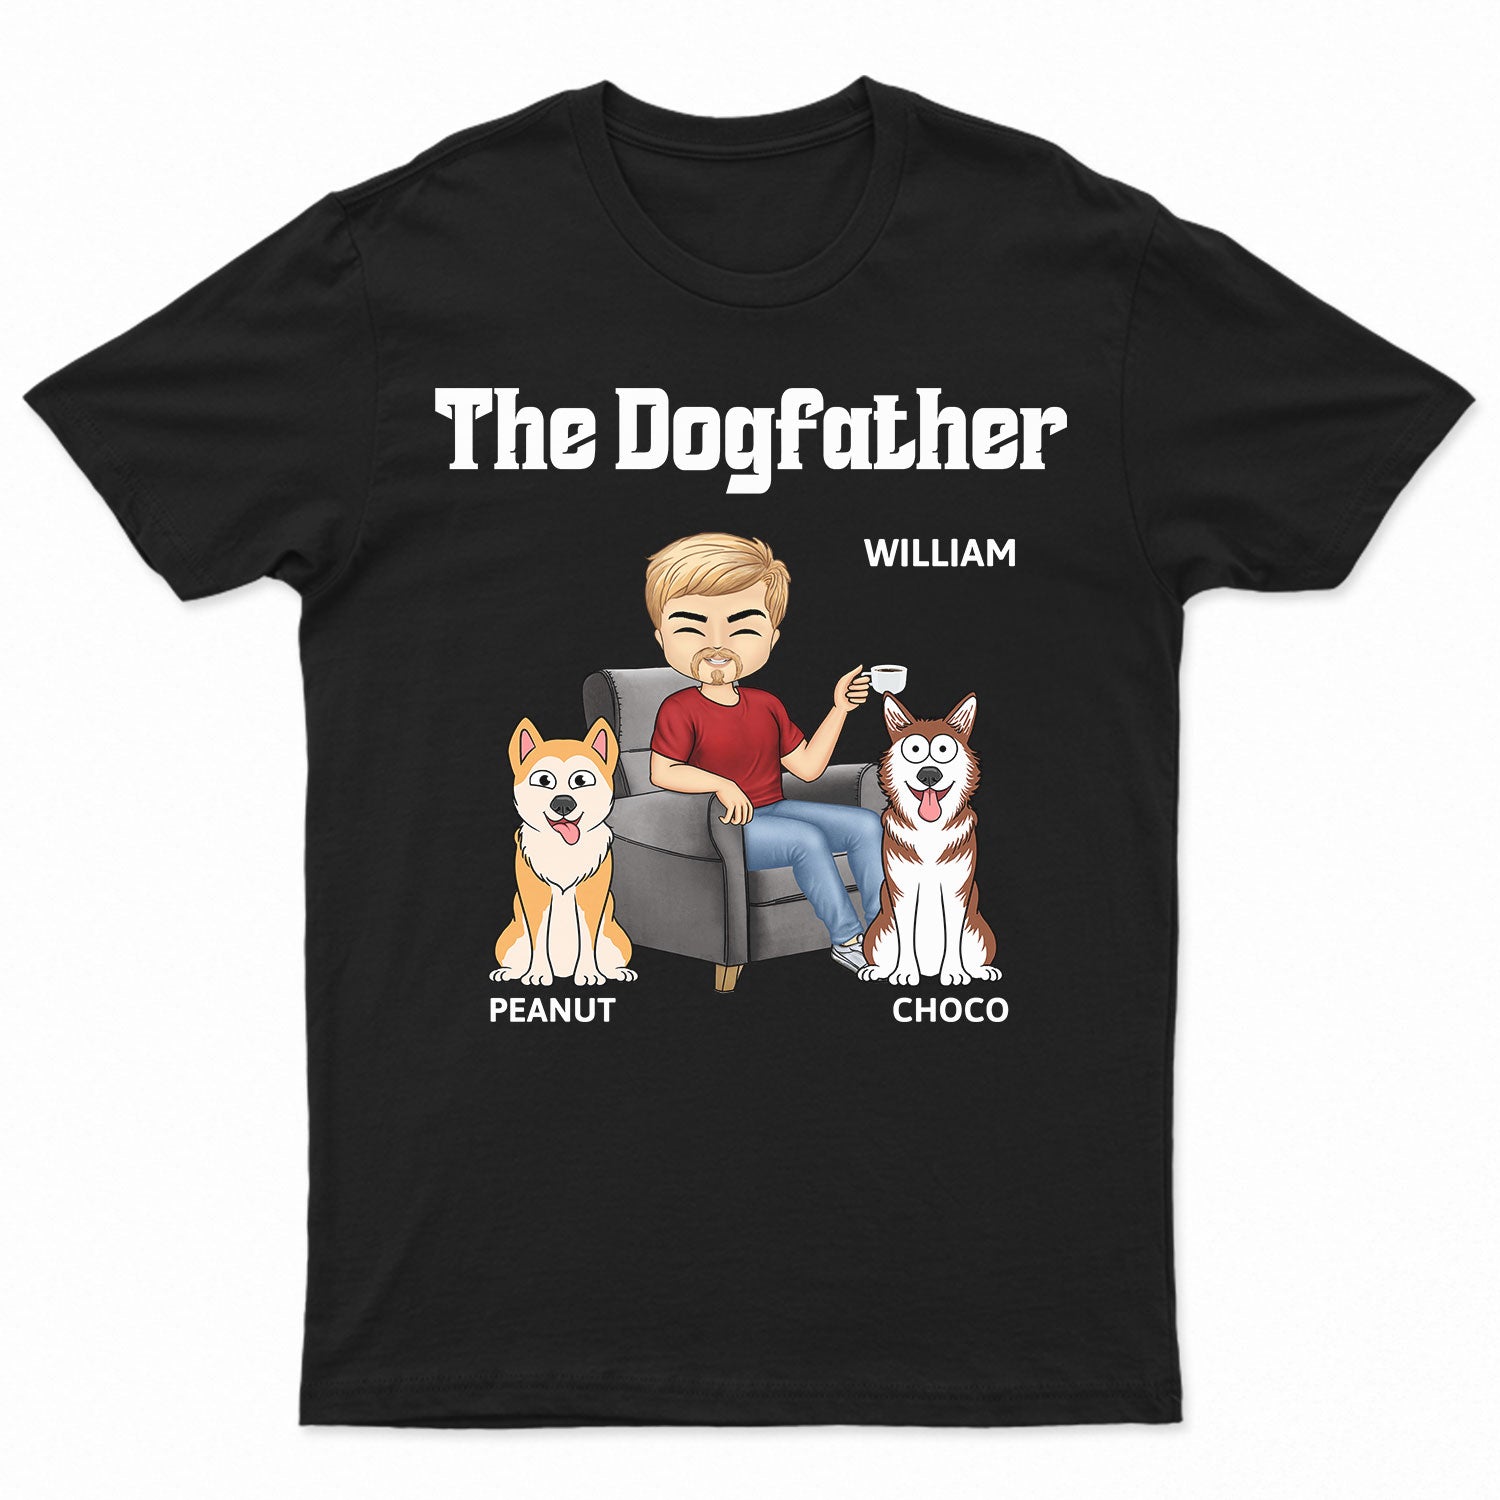 The Dog Father - Gift For Dog Dad, Dog Lovers, Men - Personalized T Shirt